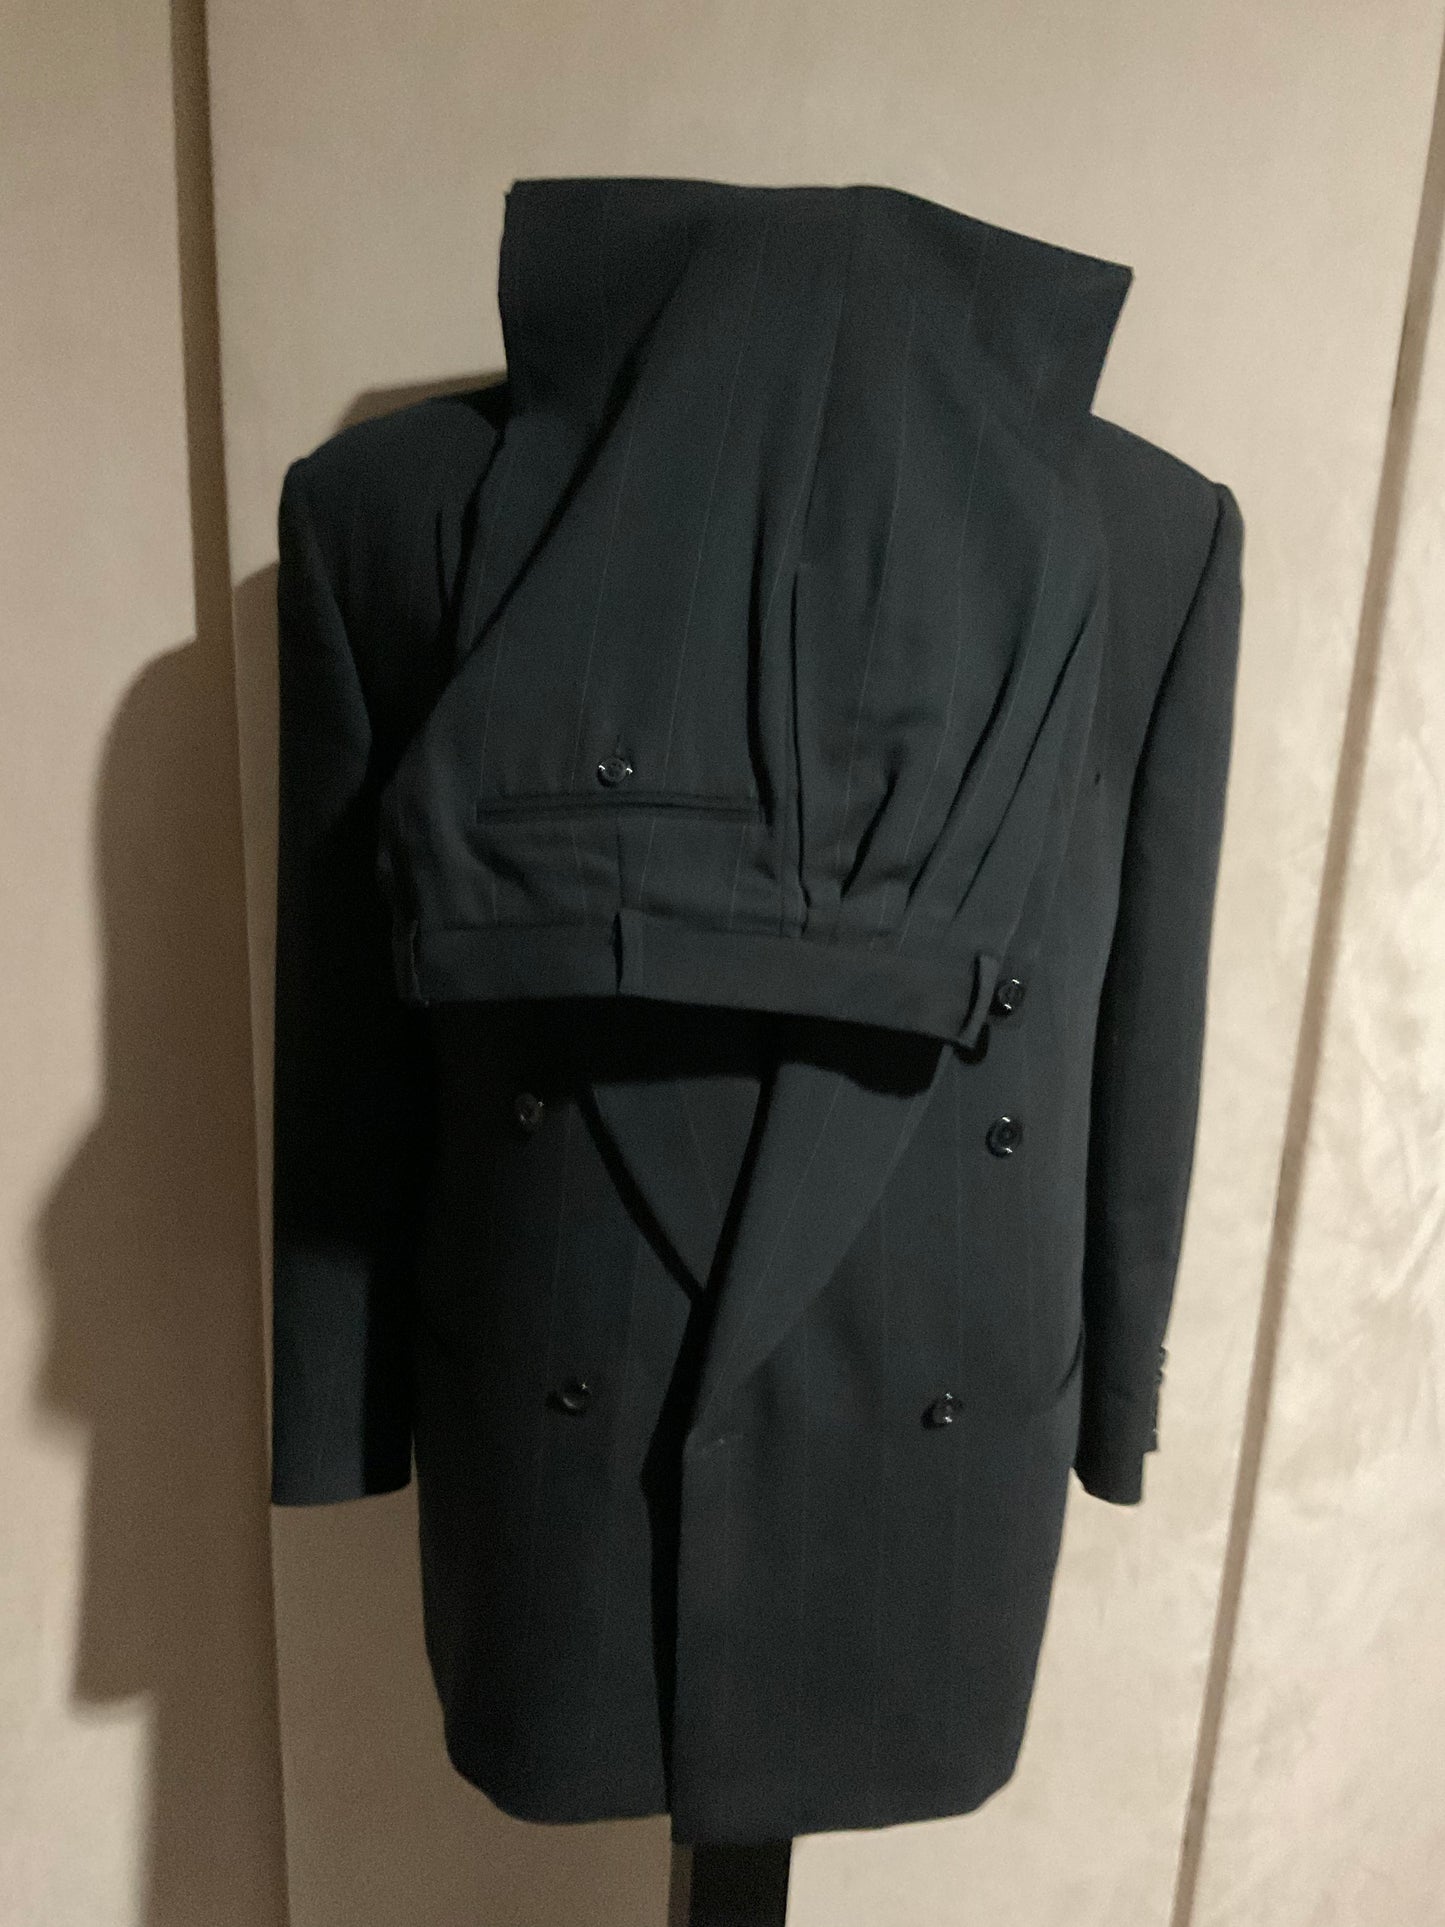 R P SUIT & VEST / DOUBLE BREASTED / BLACK STRIPE / 40 REG / MADE IN ITALY